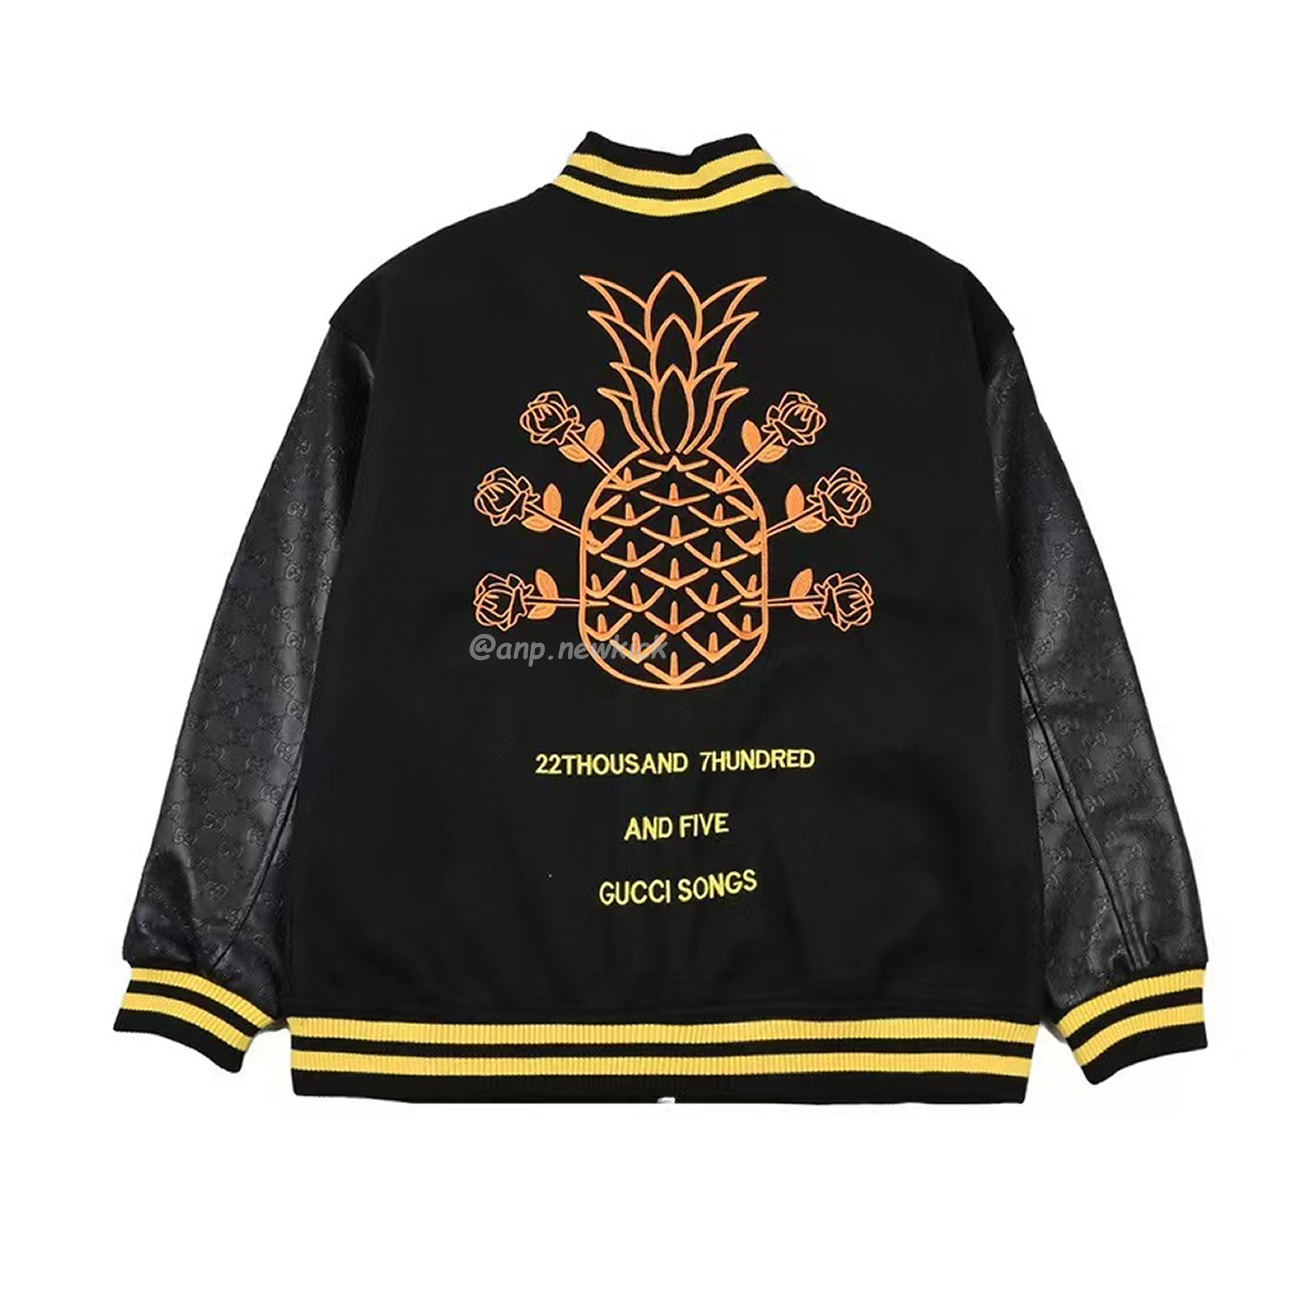 Gucci Wool Sweater Black Jacket Double G Pineapple Embroidered Patchwork Design (2) - newkick.org